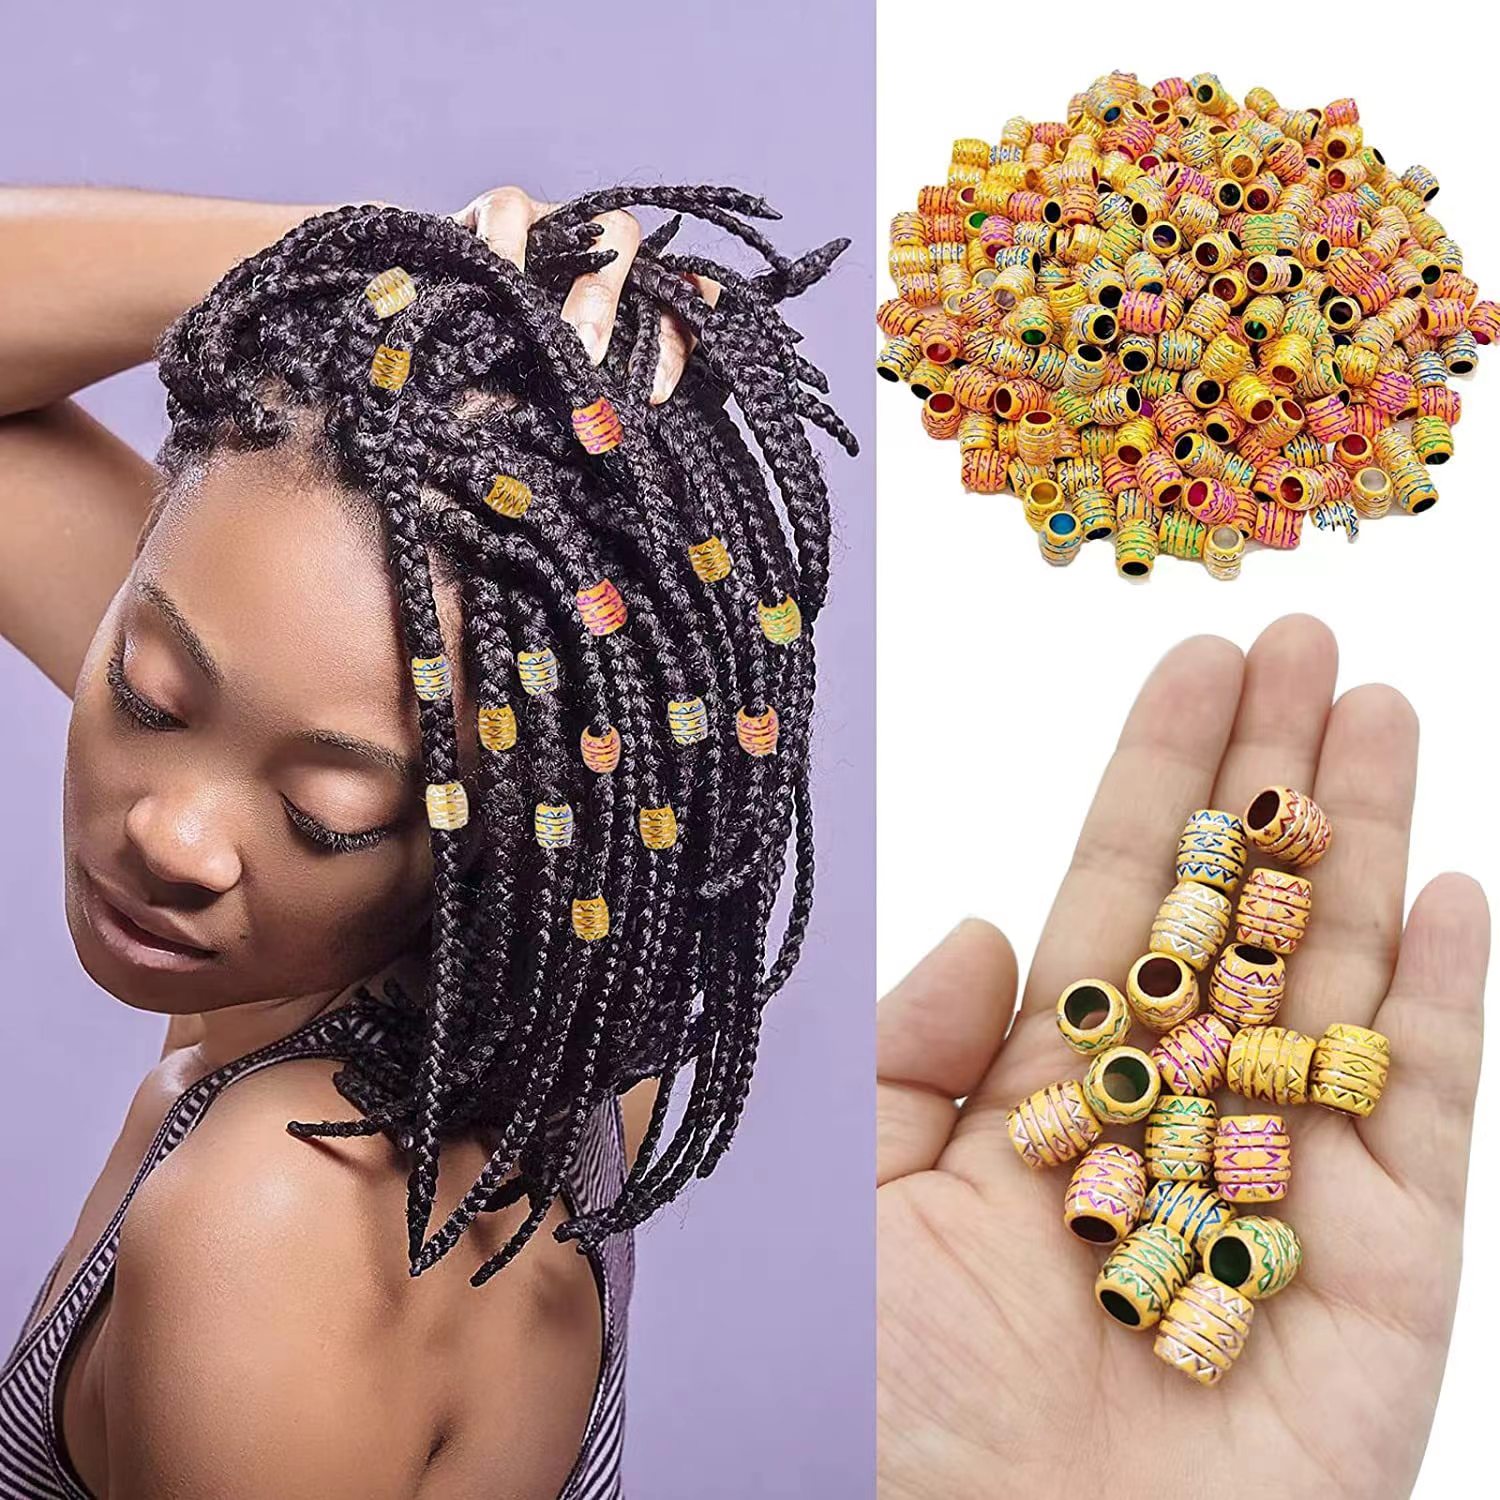 100pcs 12mm African Wood Beads for Hair Assorted Macrame Beads